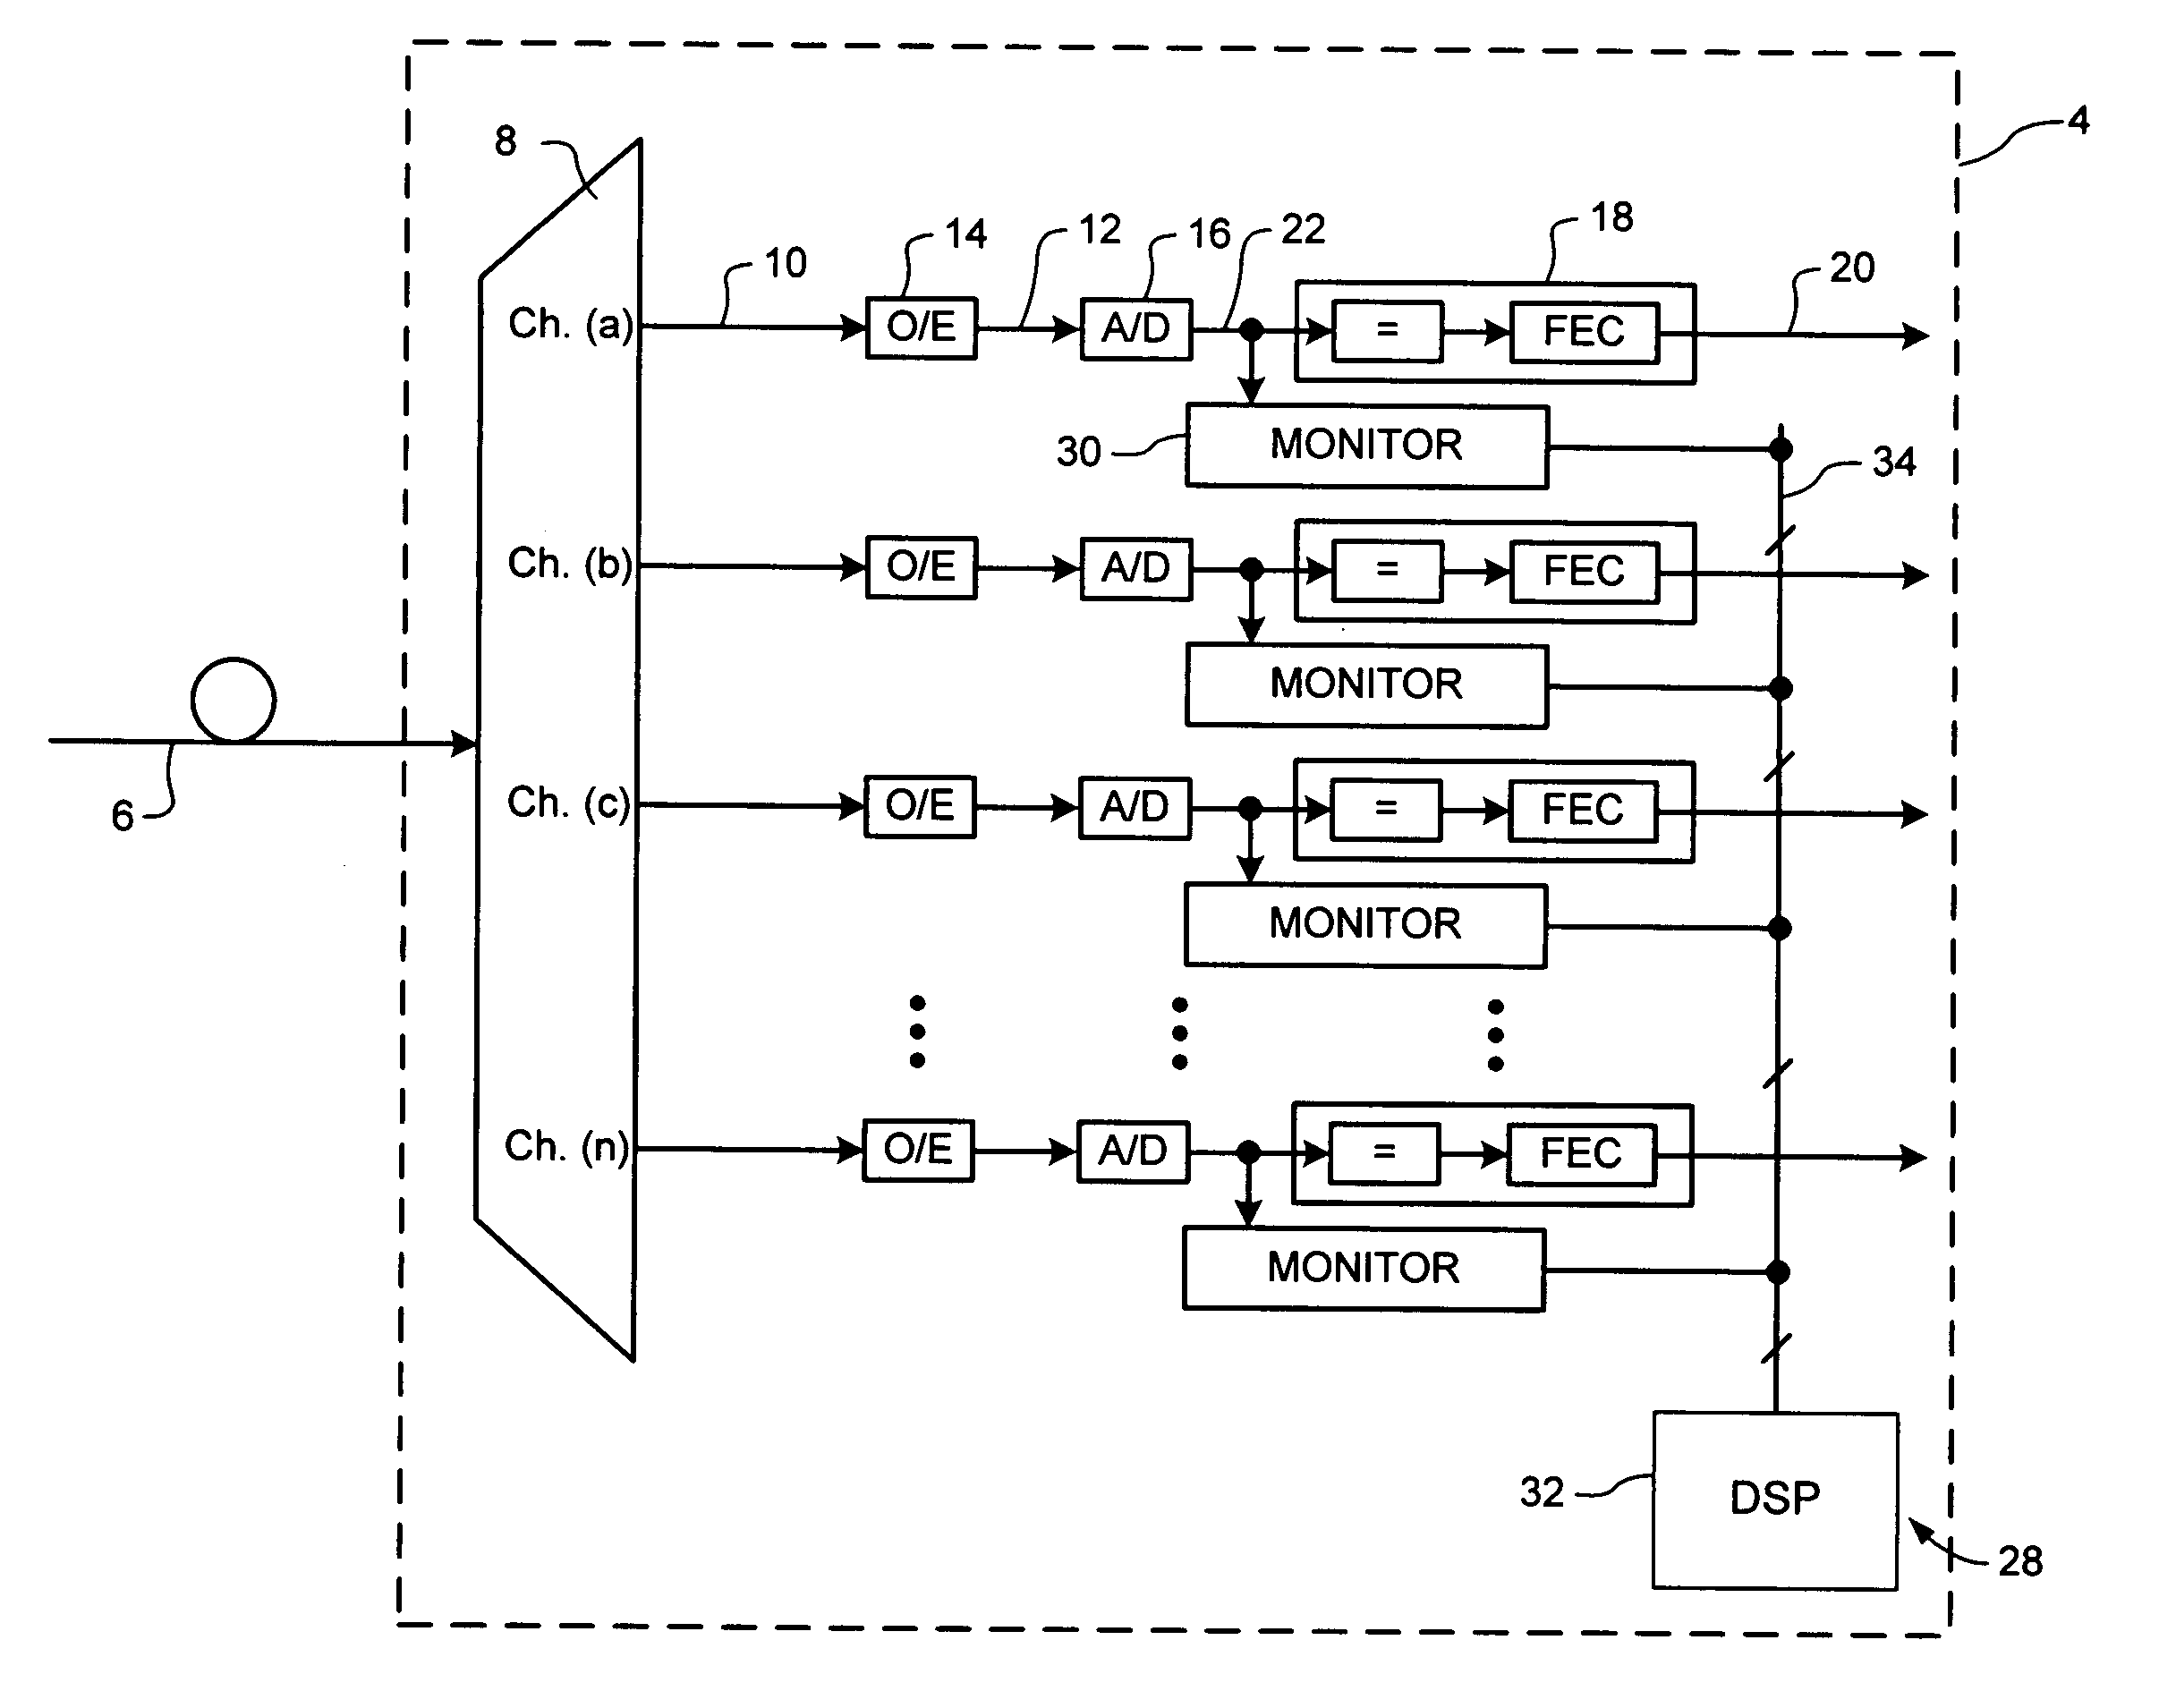 Digital performance monitoring for an optical communications system